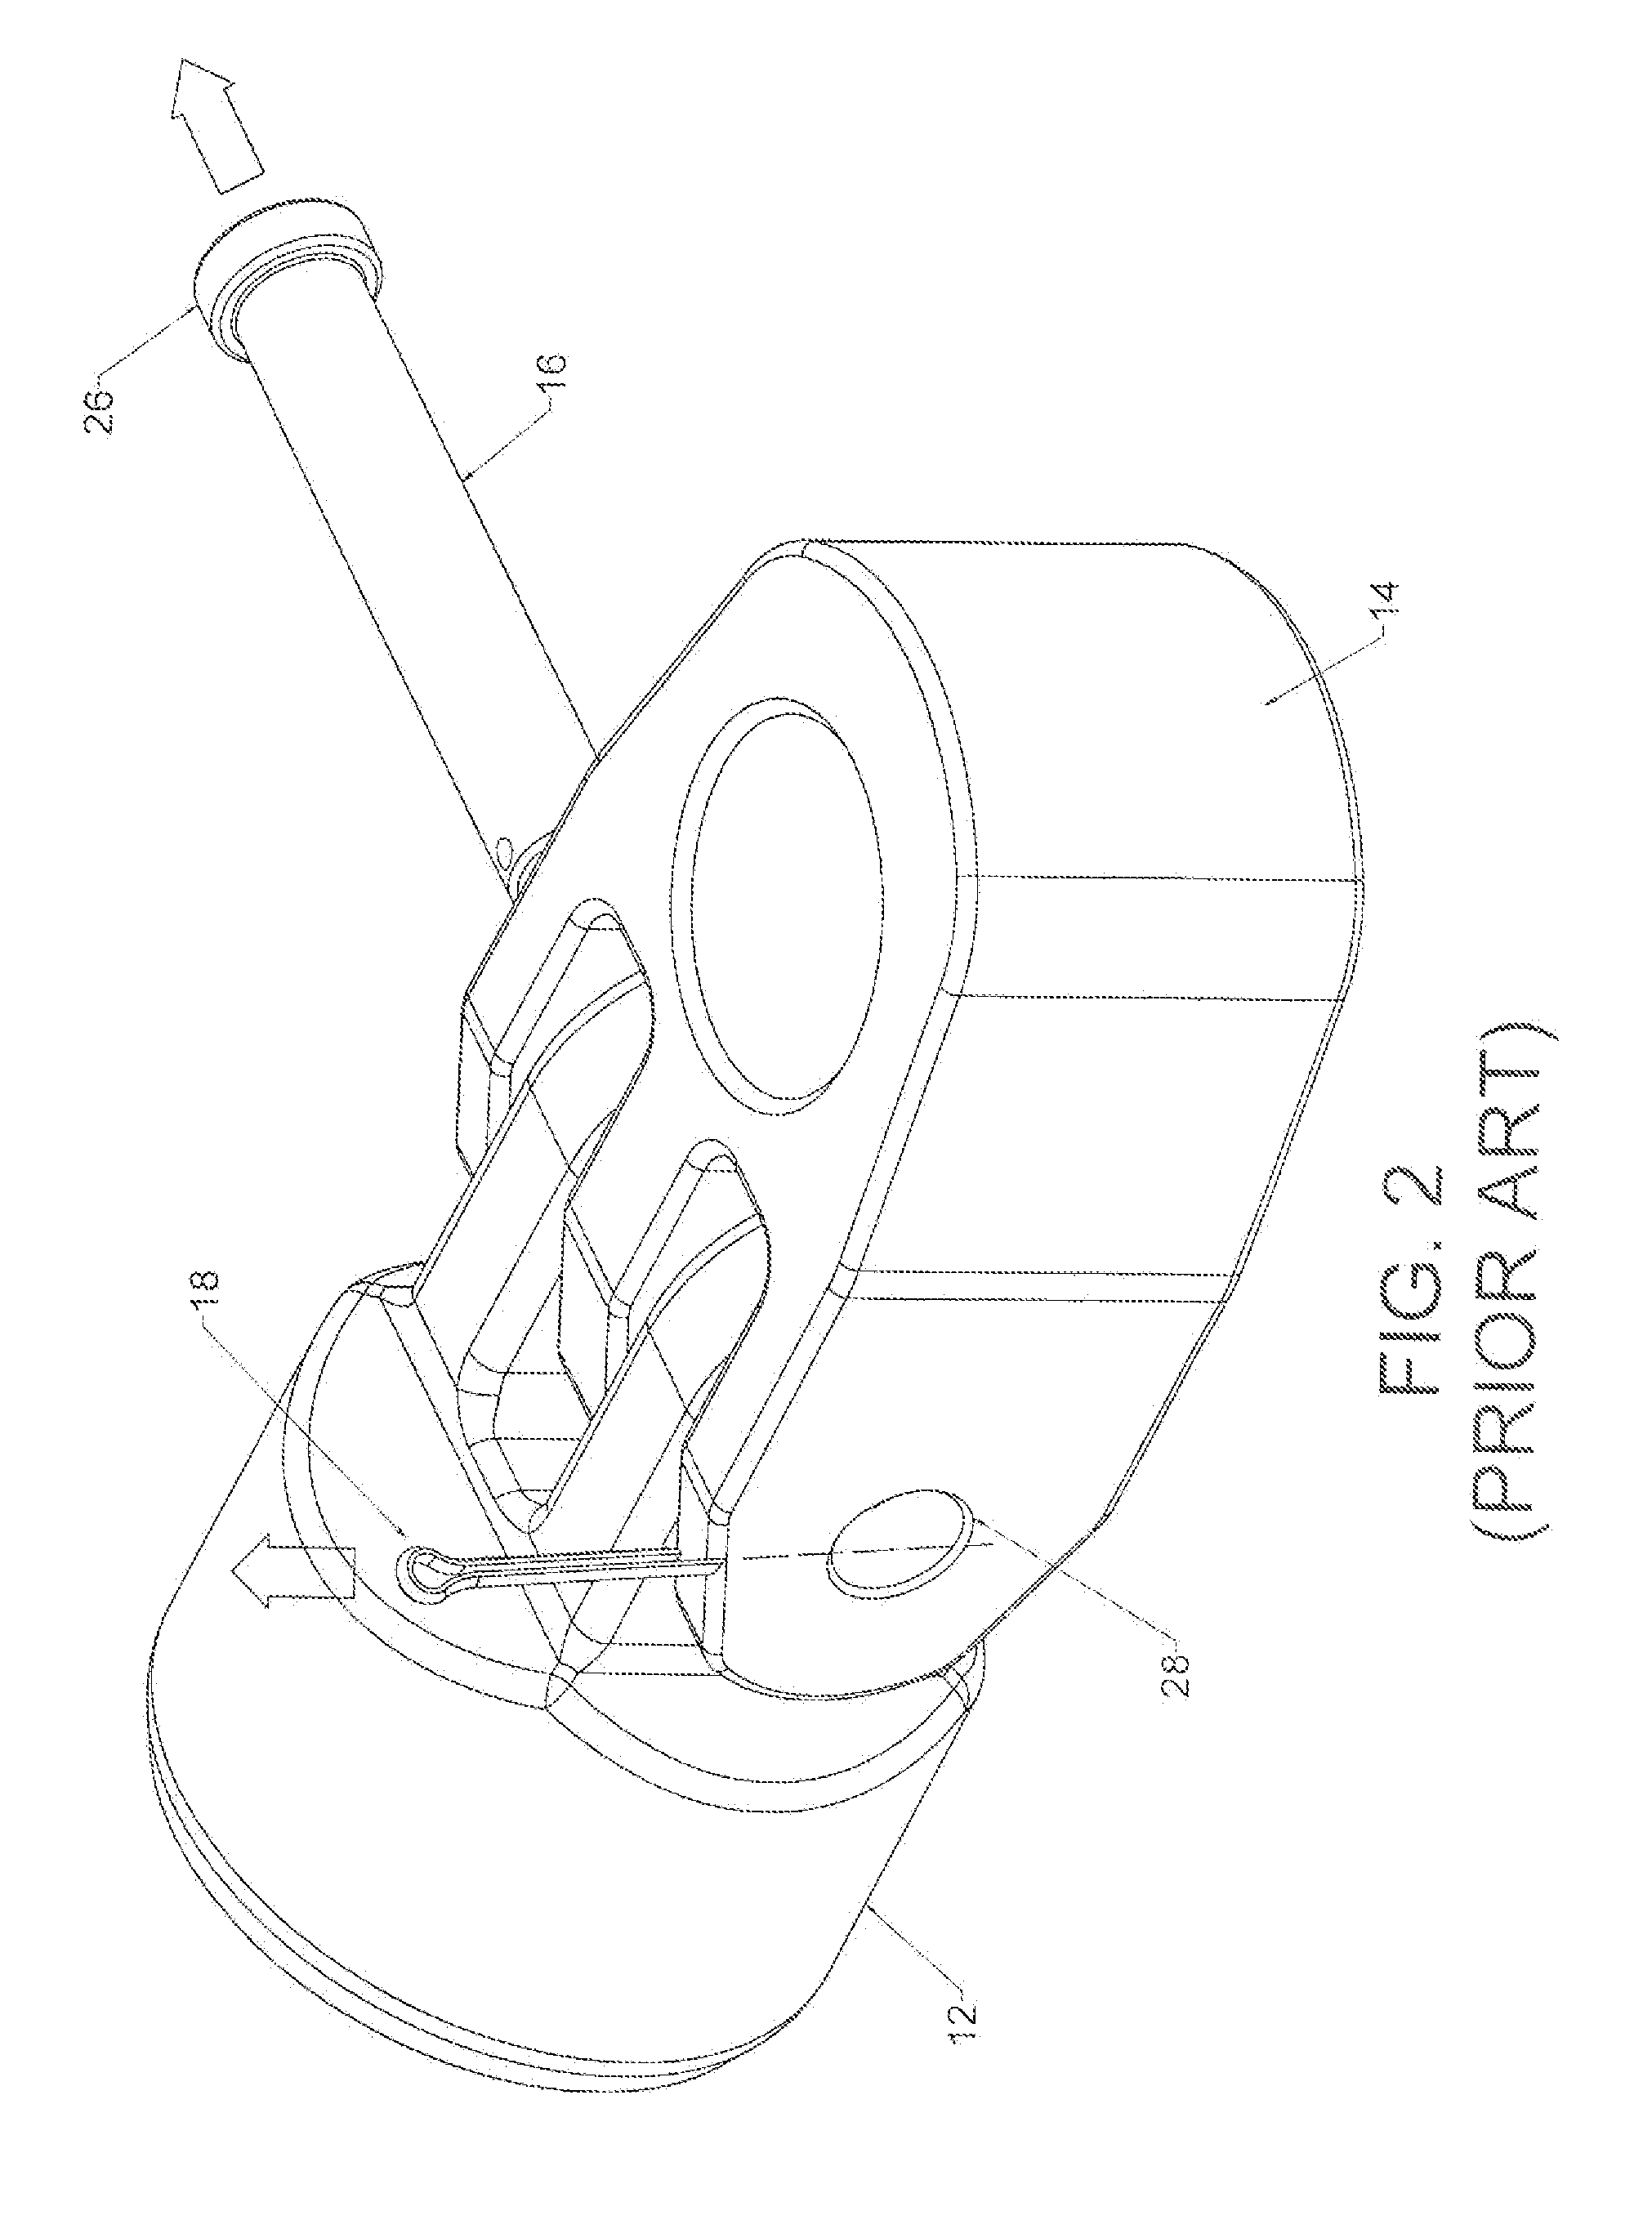 Locking Pin with Spring Retention Mechanism